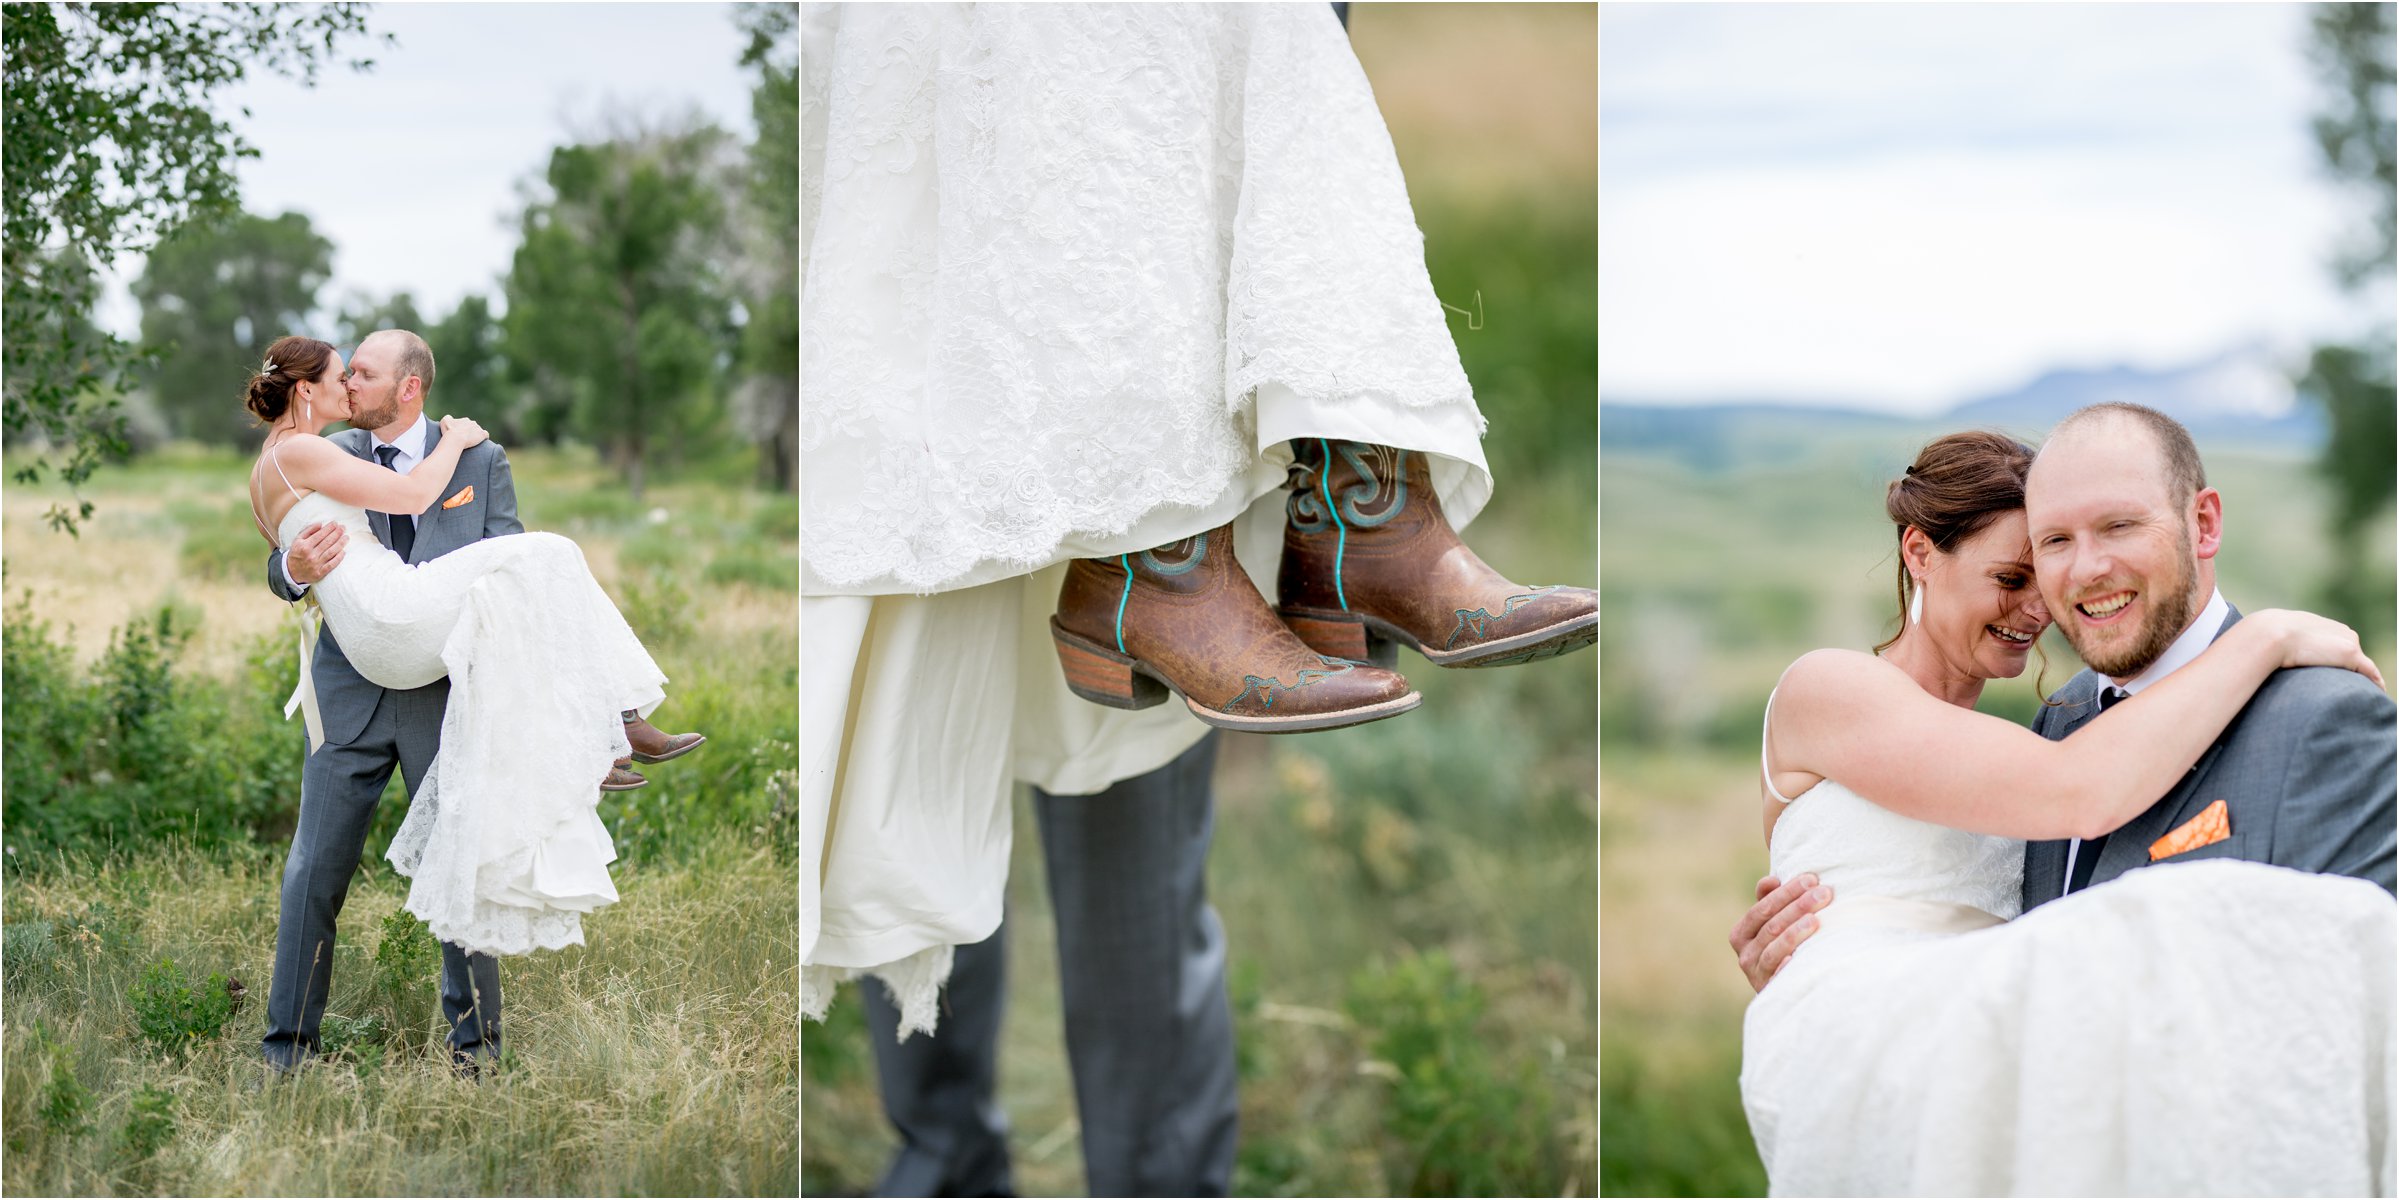 Jackson Hole, Wyoming Wedding in the Grand Tetons by Northern Colorado Wedding Photographer